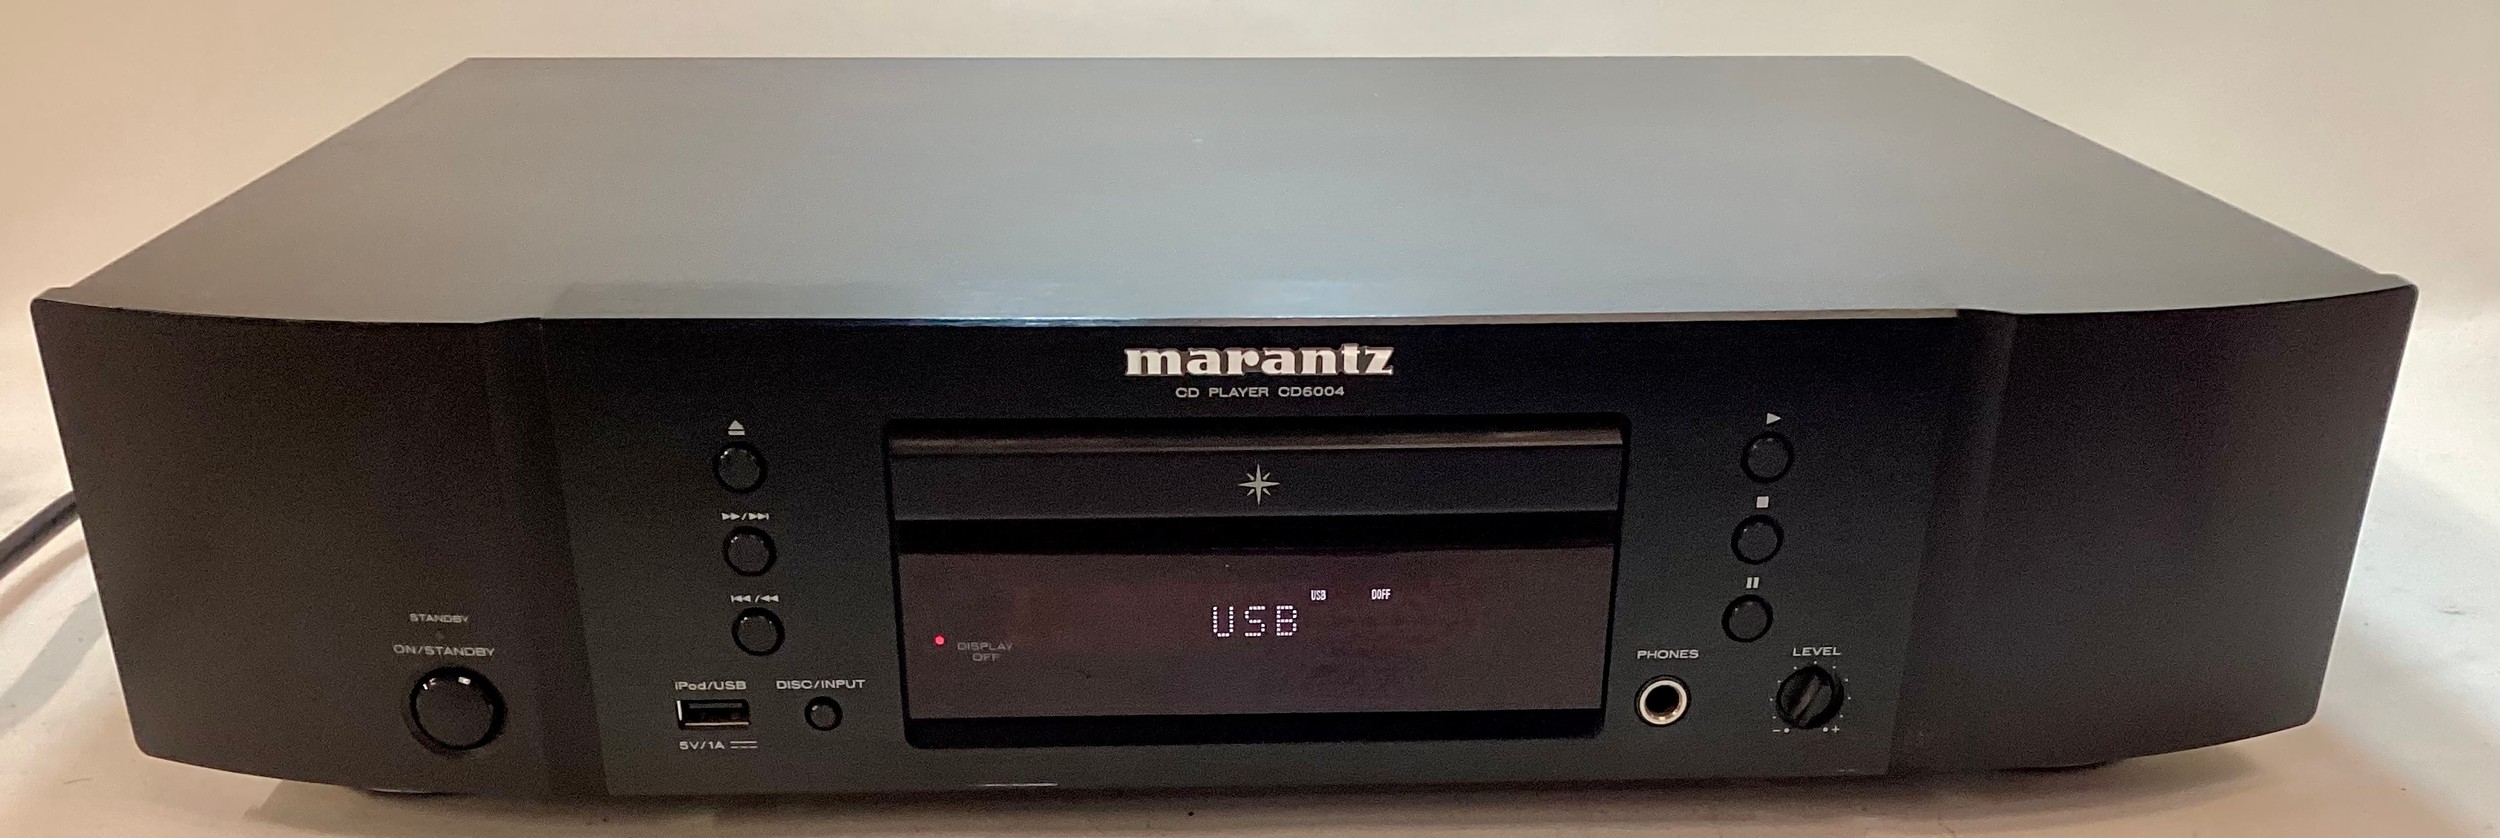 MARANTZ COMPACT DISC PLAYER. Nice condition here with model CD6004 complete with remote. Powers up